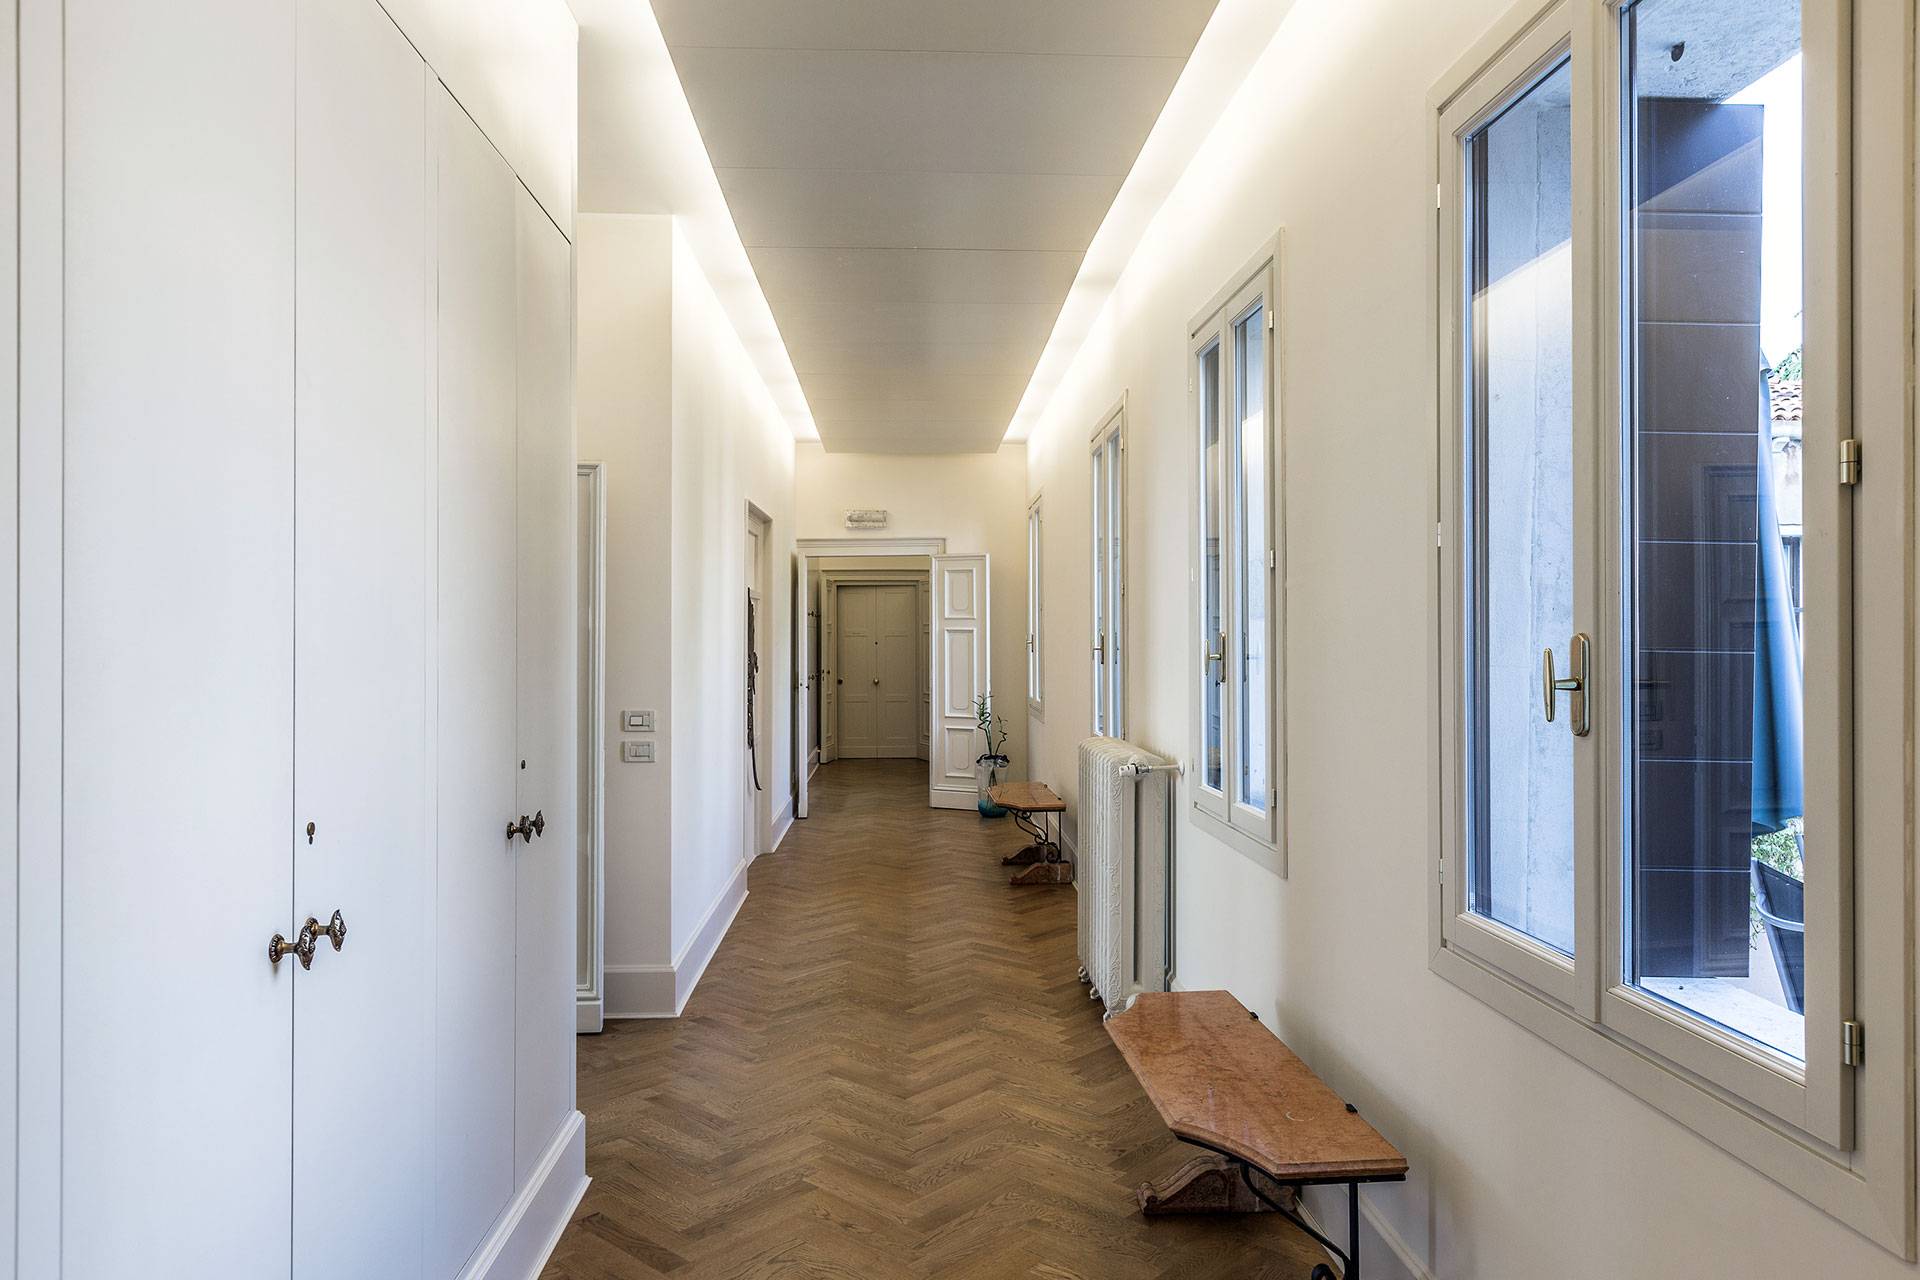 shared corridor connecting the 4 independent units and leading to the terrace